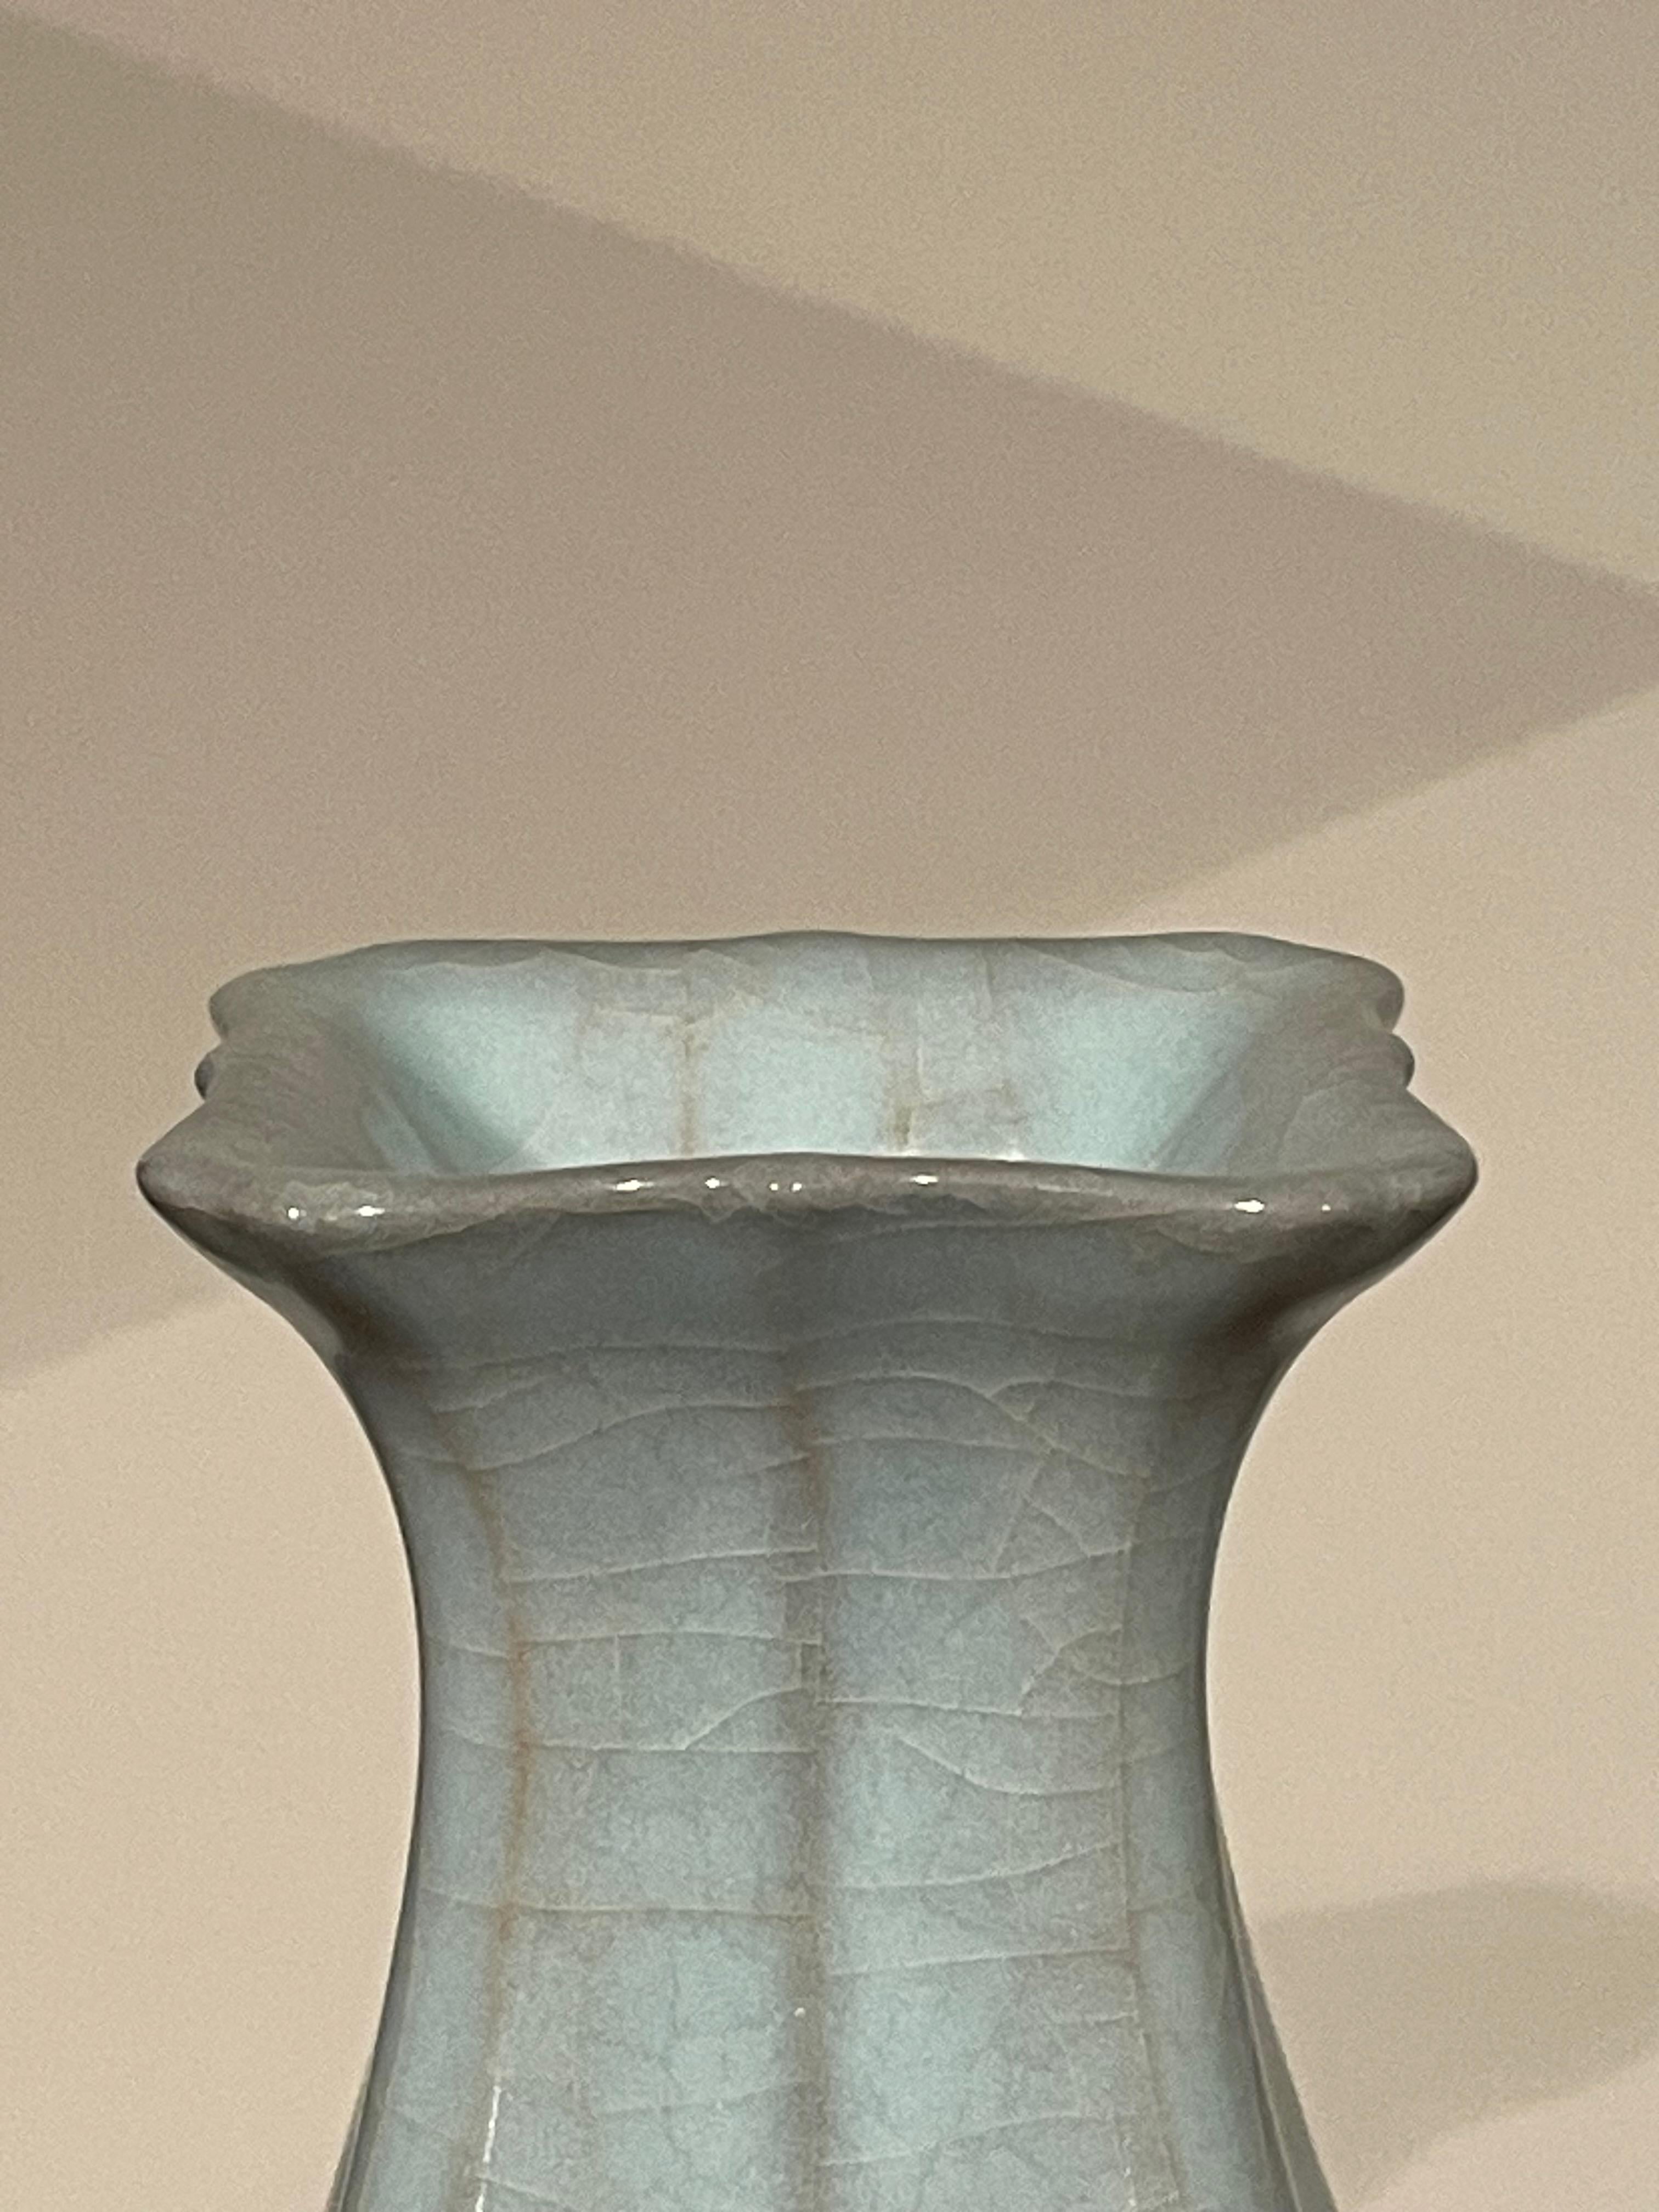 Contemporary Chinese pale turquoise vase.
Square top with ribbed corner design.
Large collection available with varying sizes and shapes.
ARRIVING APRIL